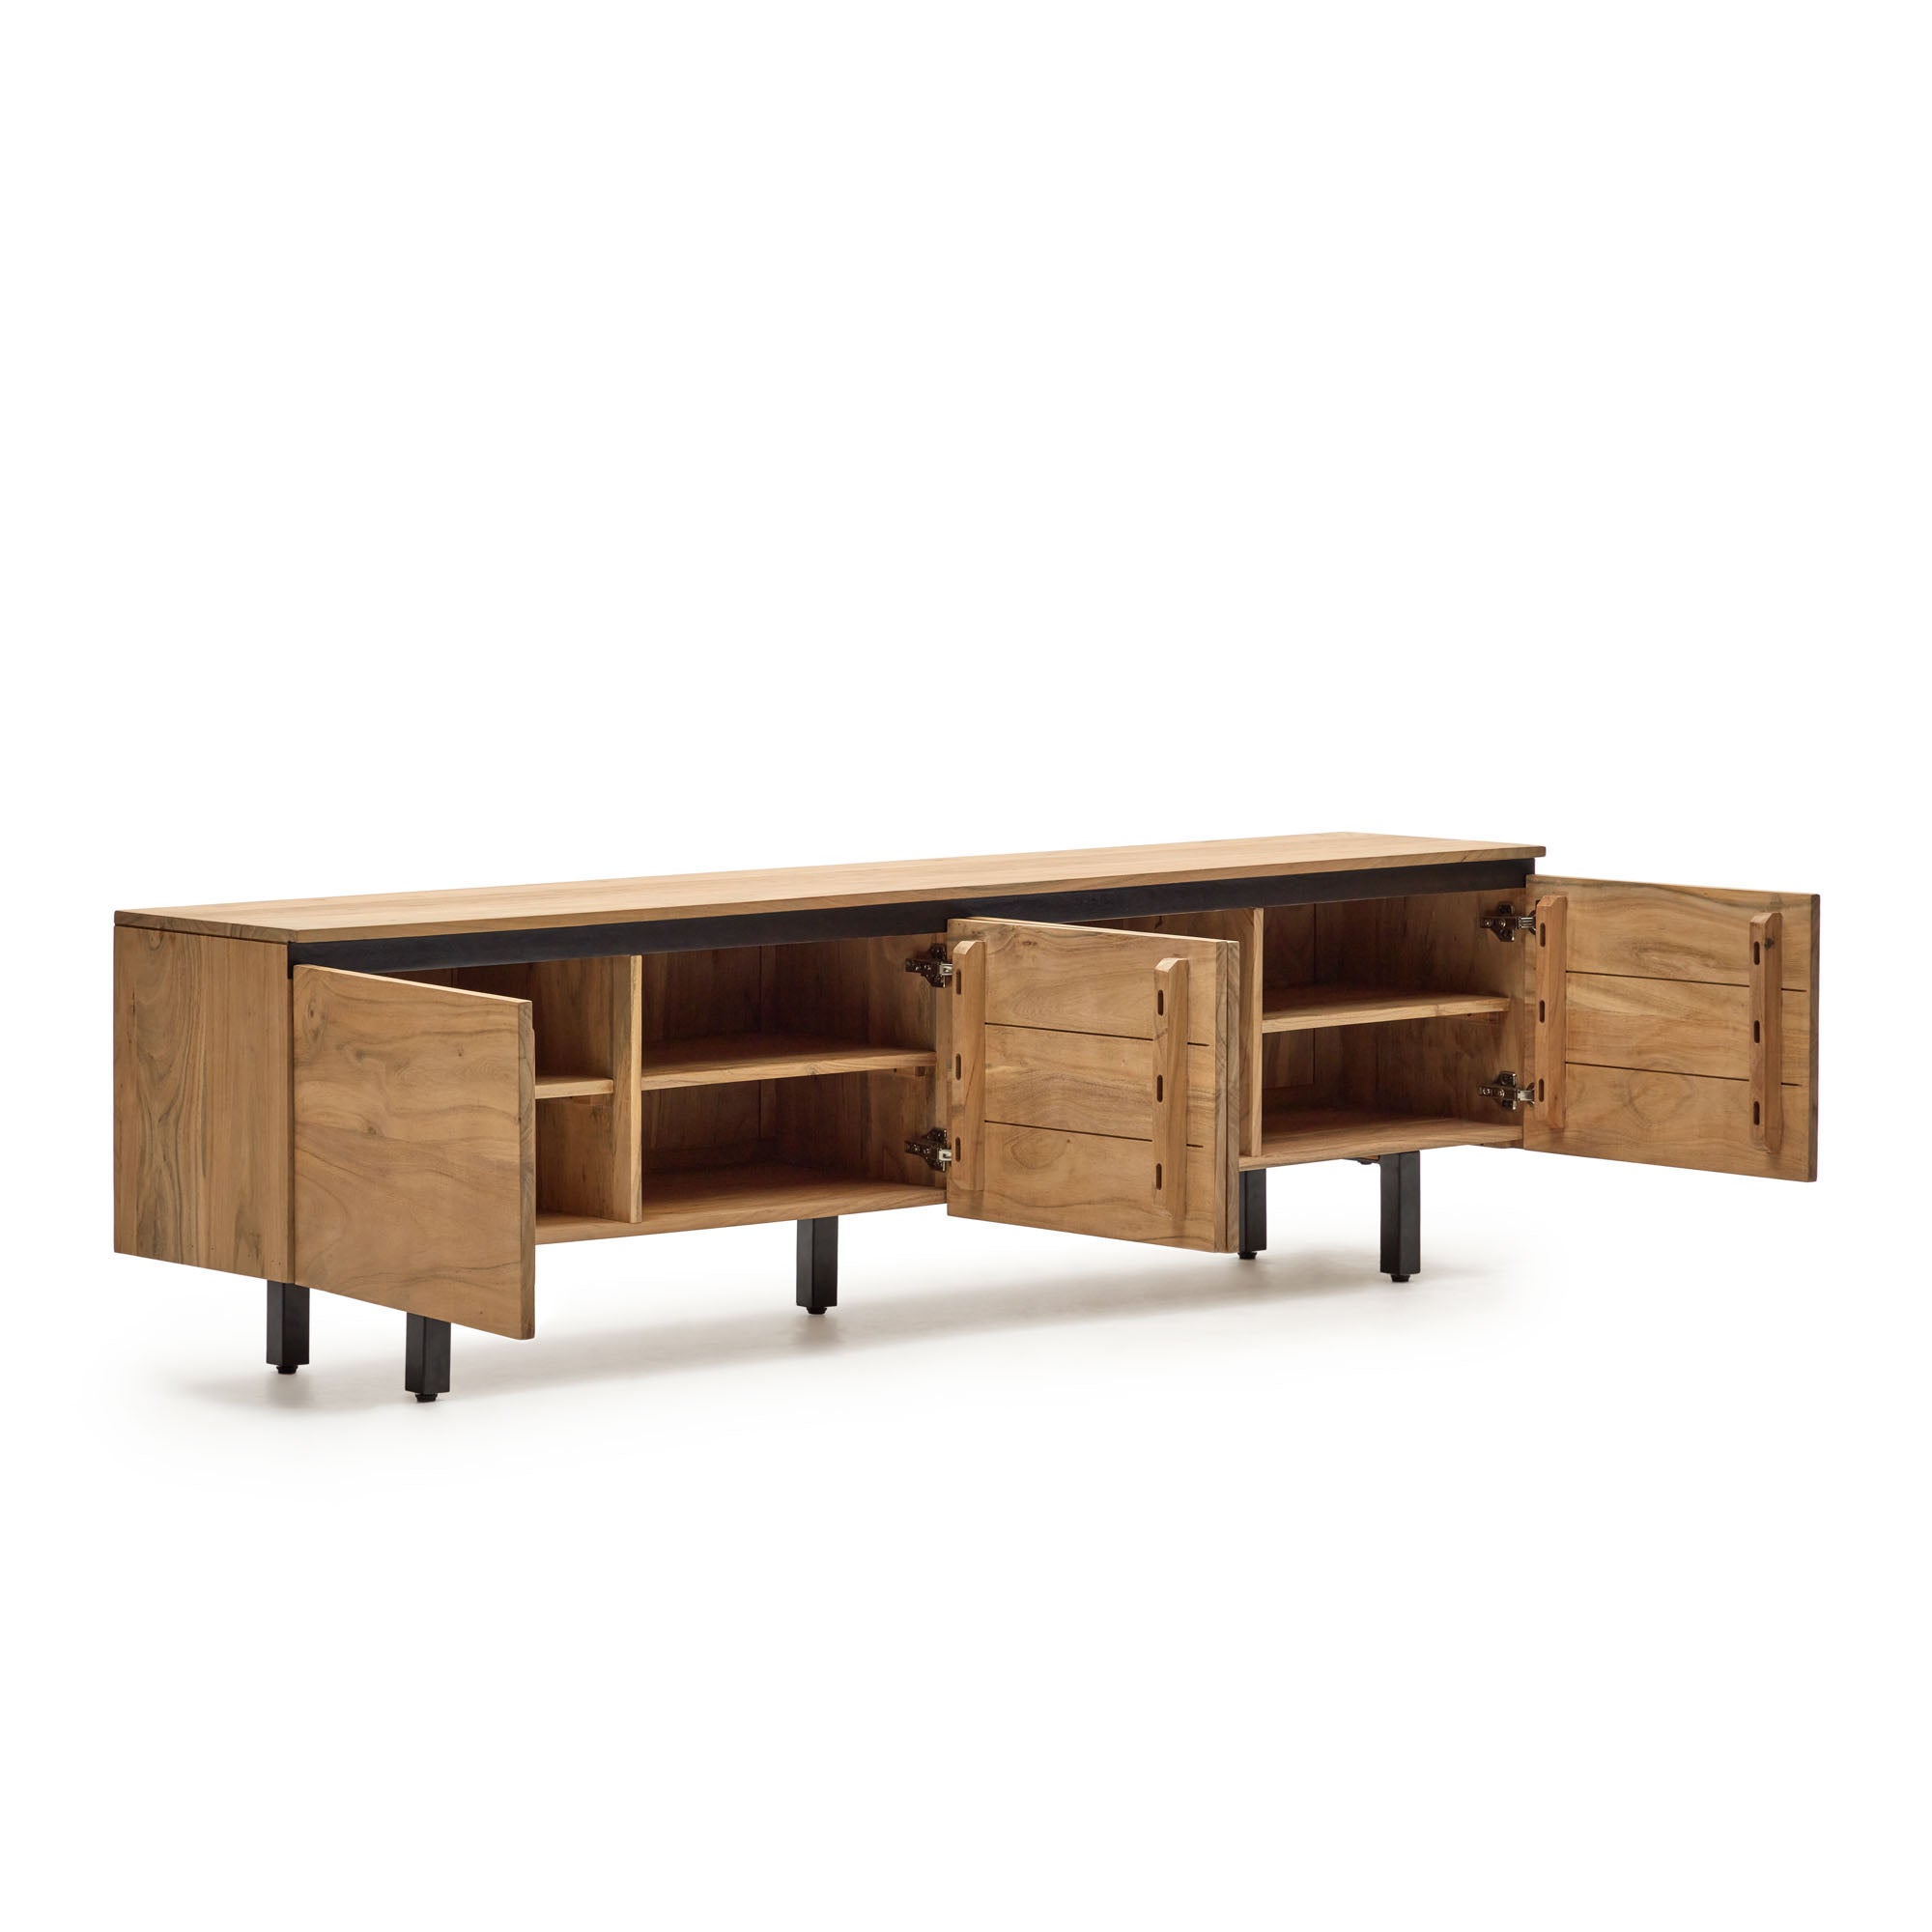 Uxue TV stand with 4 solid acacia wood doors in a natural finish, 200 x 58 cm